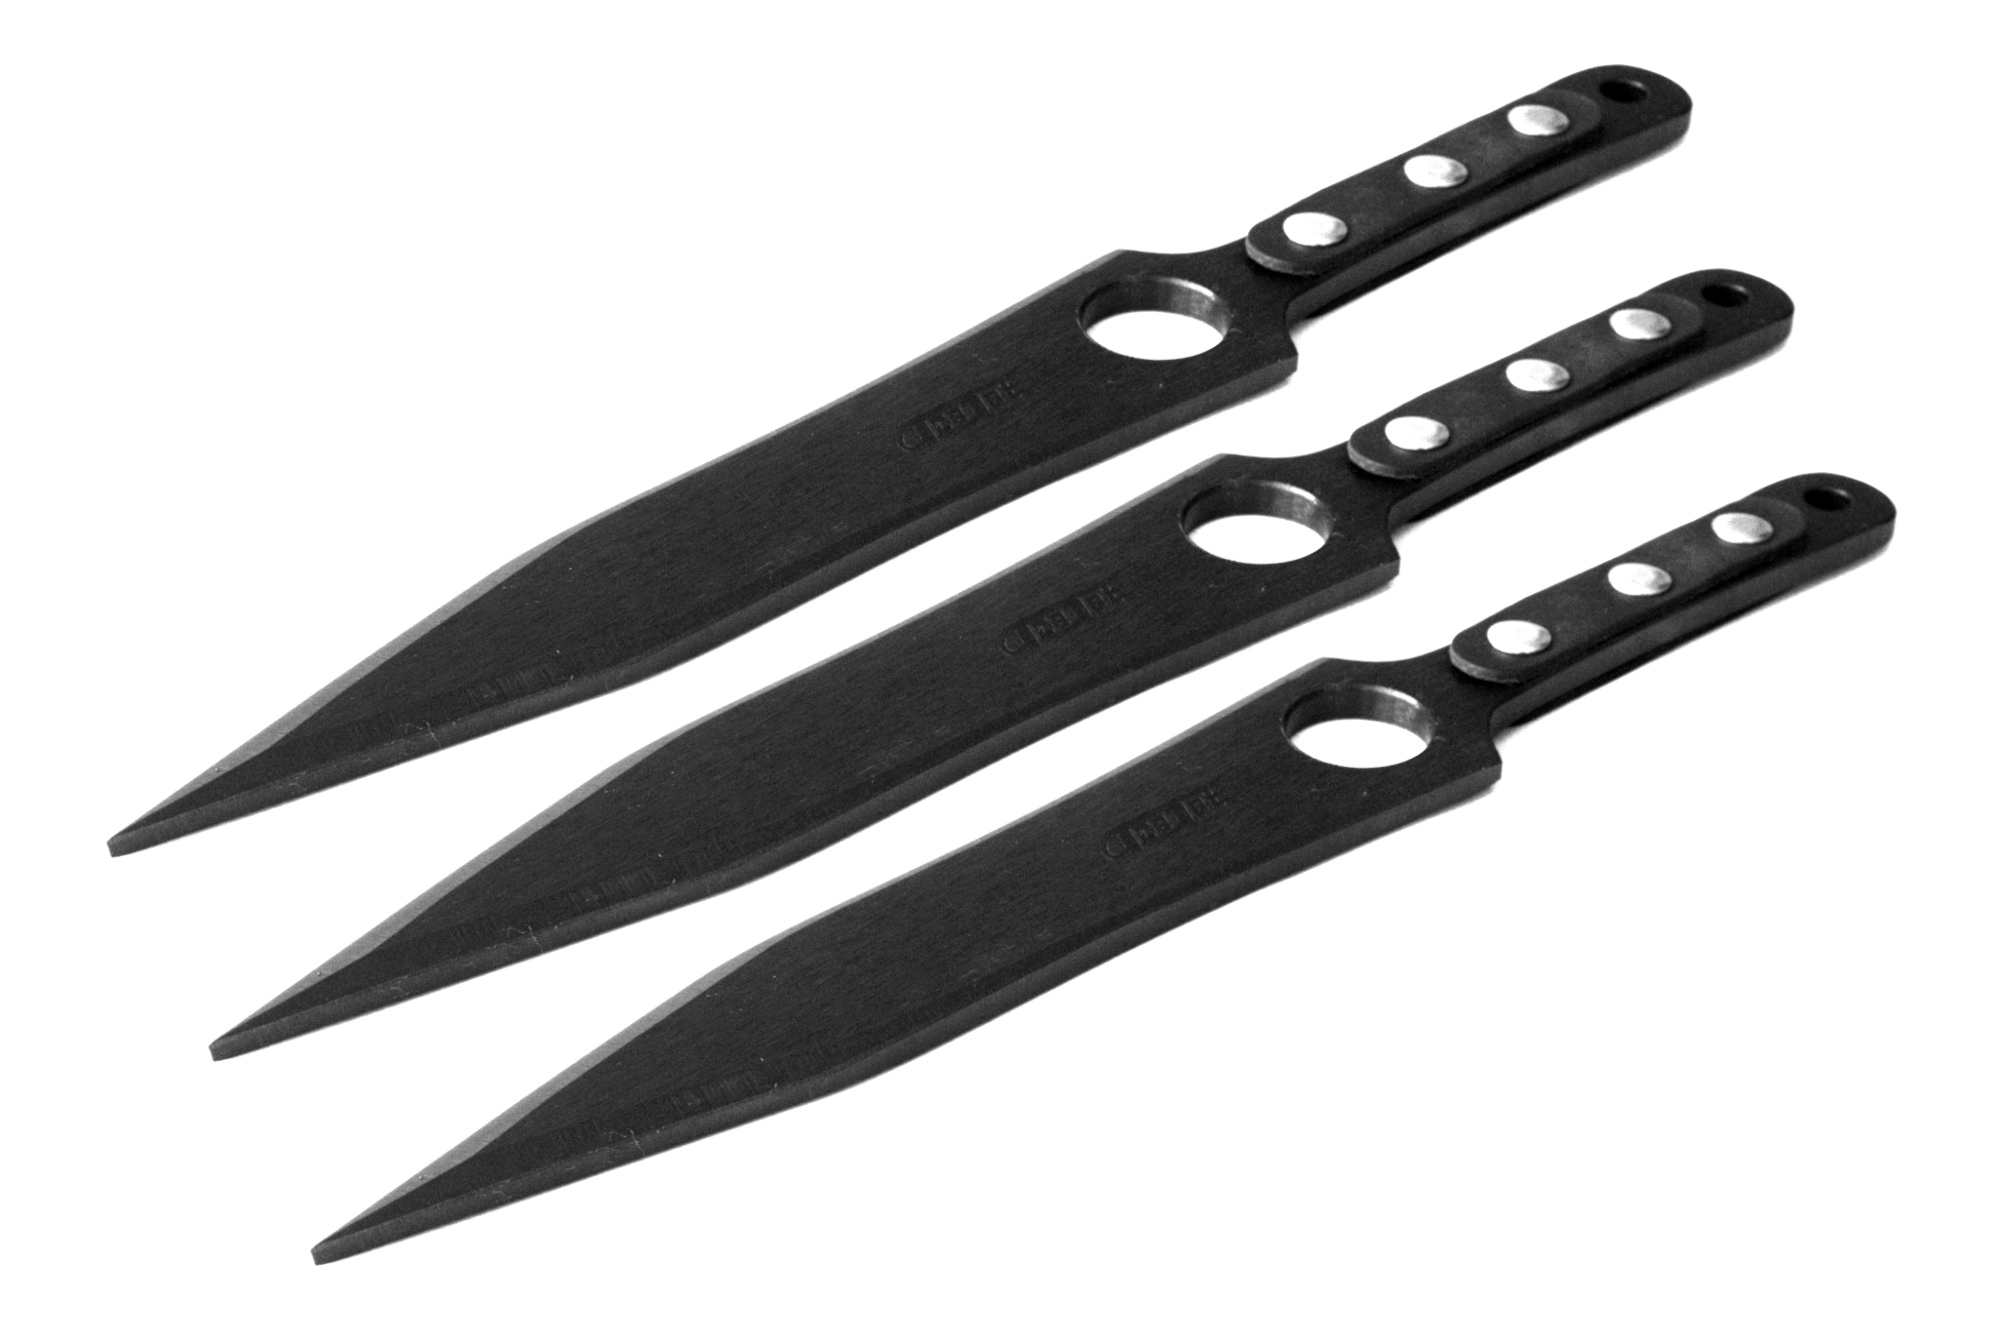 ACEJET MAXIMUS SHADOW - Spinner Throwing knife - set of 3